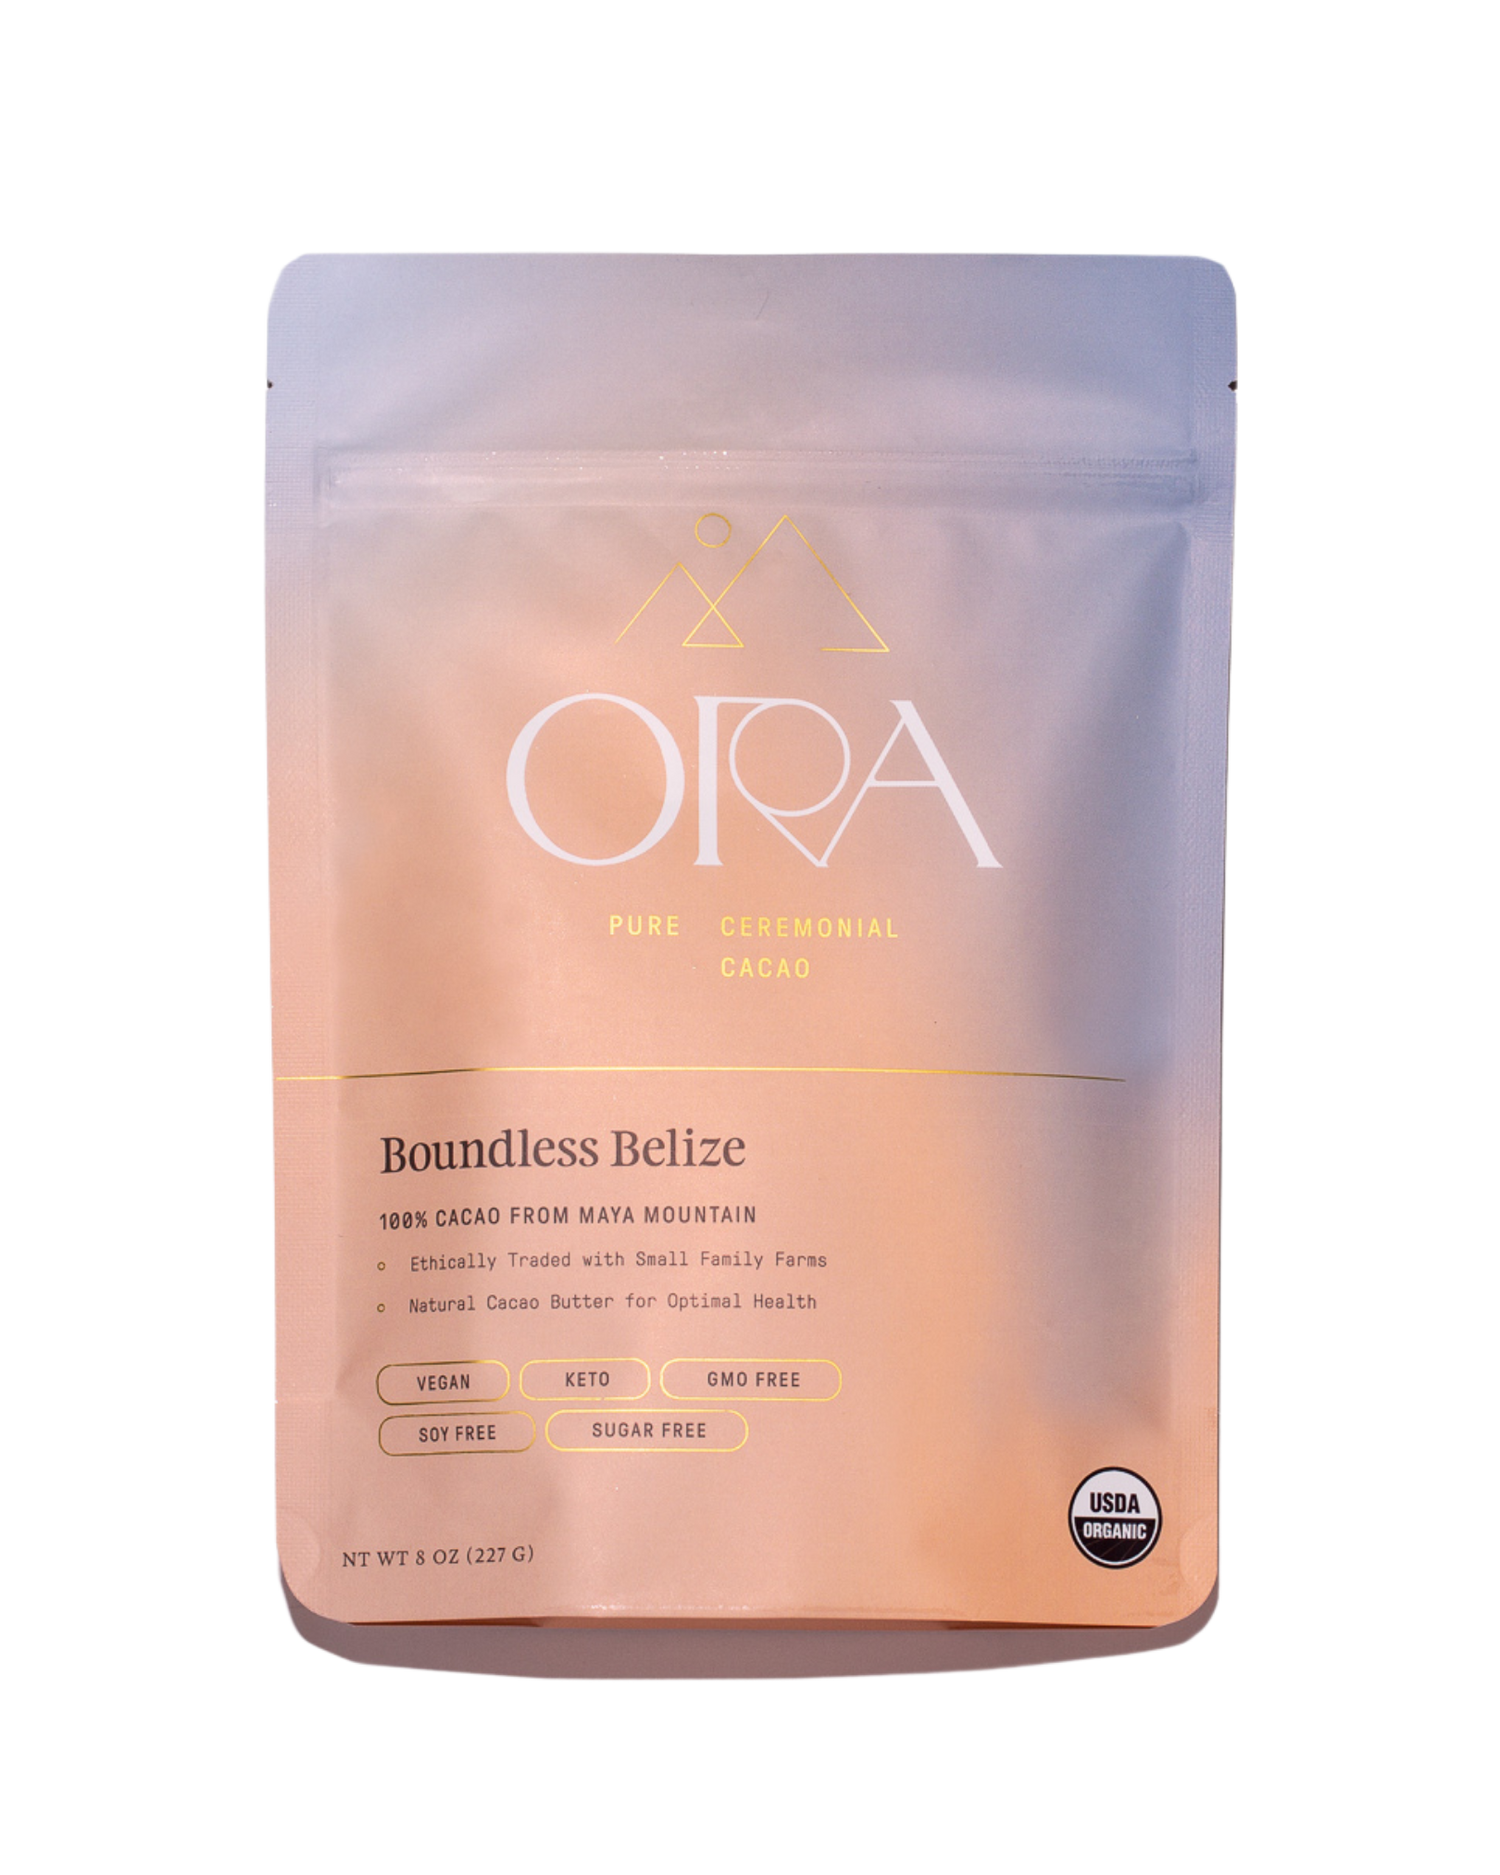 Ora Ceremonial Cacao Boundless Belize Front